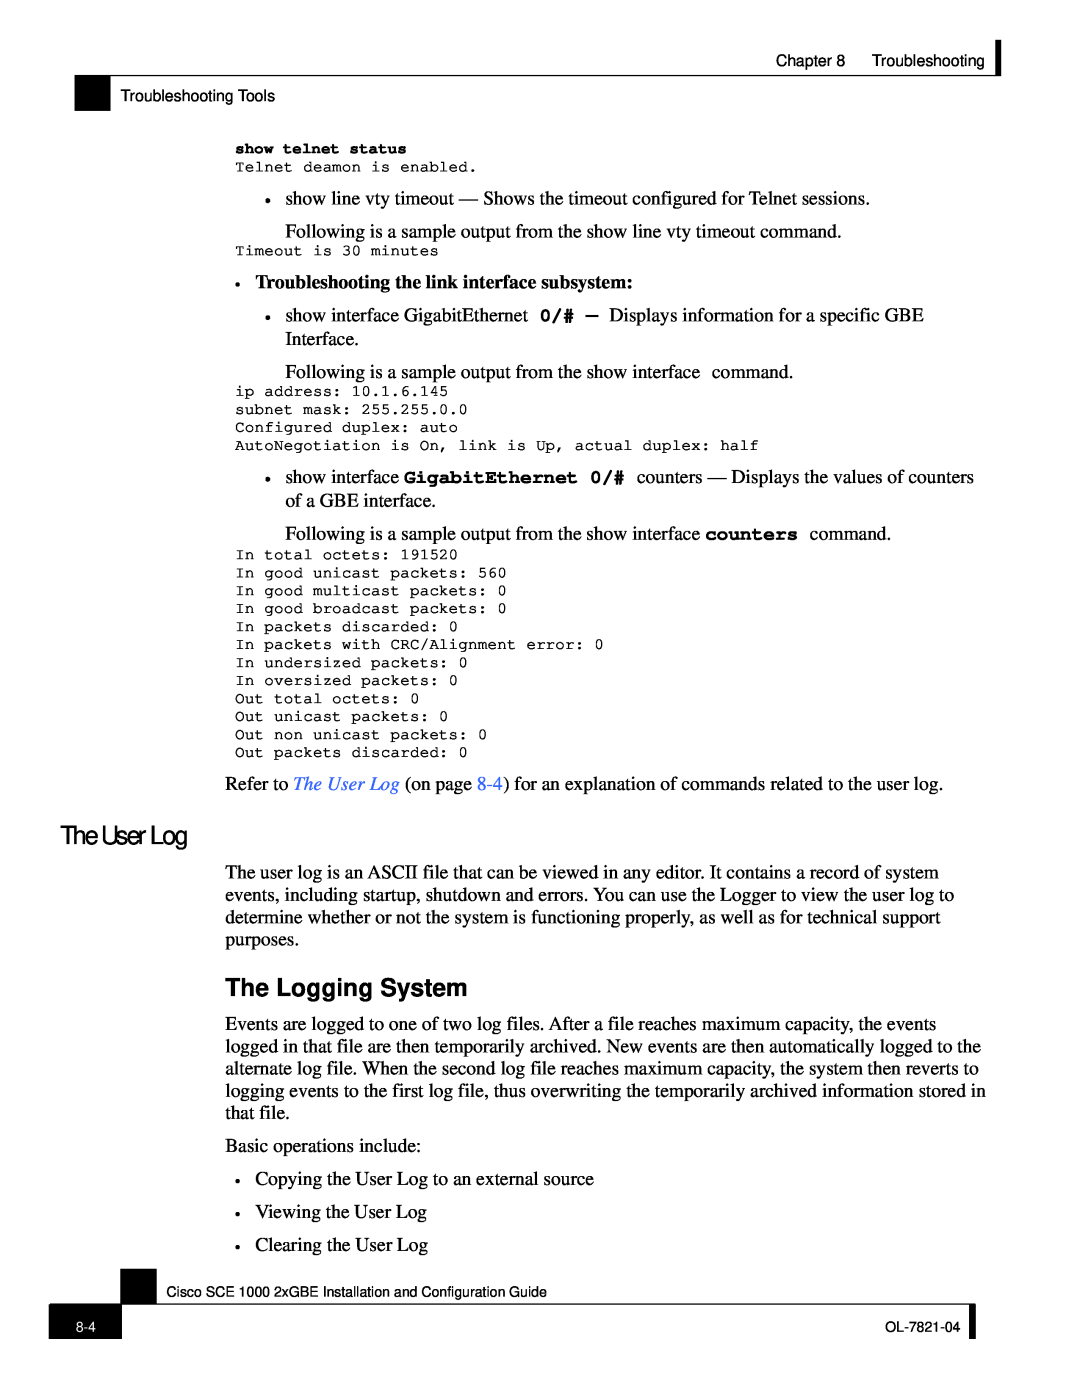 Cisco Systems OL-7821-04, SCE 1000 2xGBE The User Log, The Logging System, Troubleshooting the link interface subsystem 